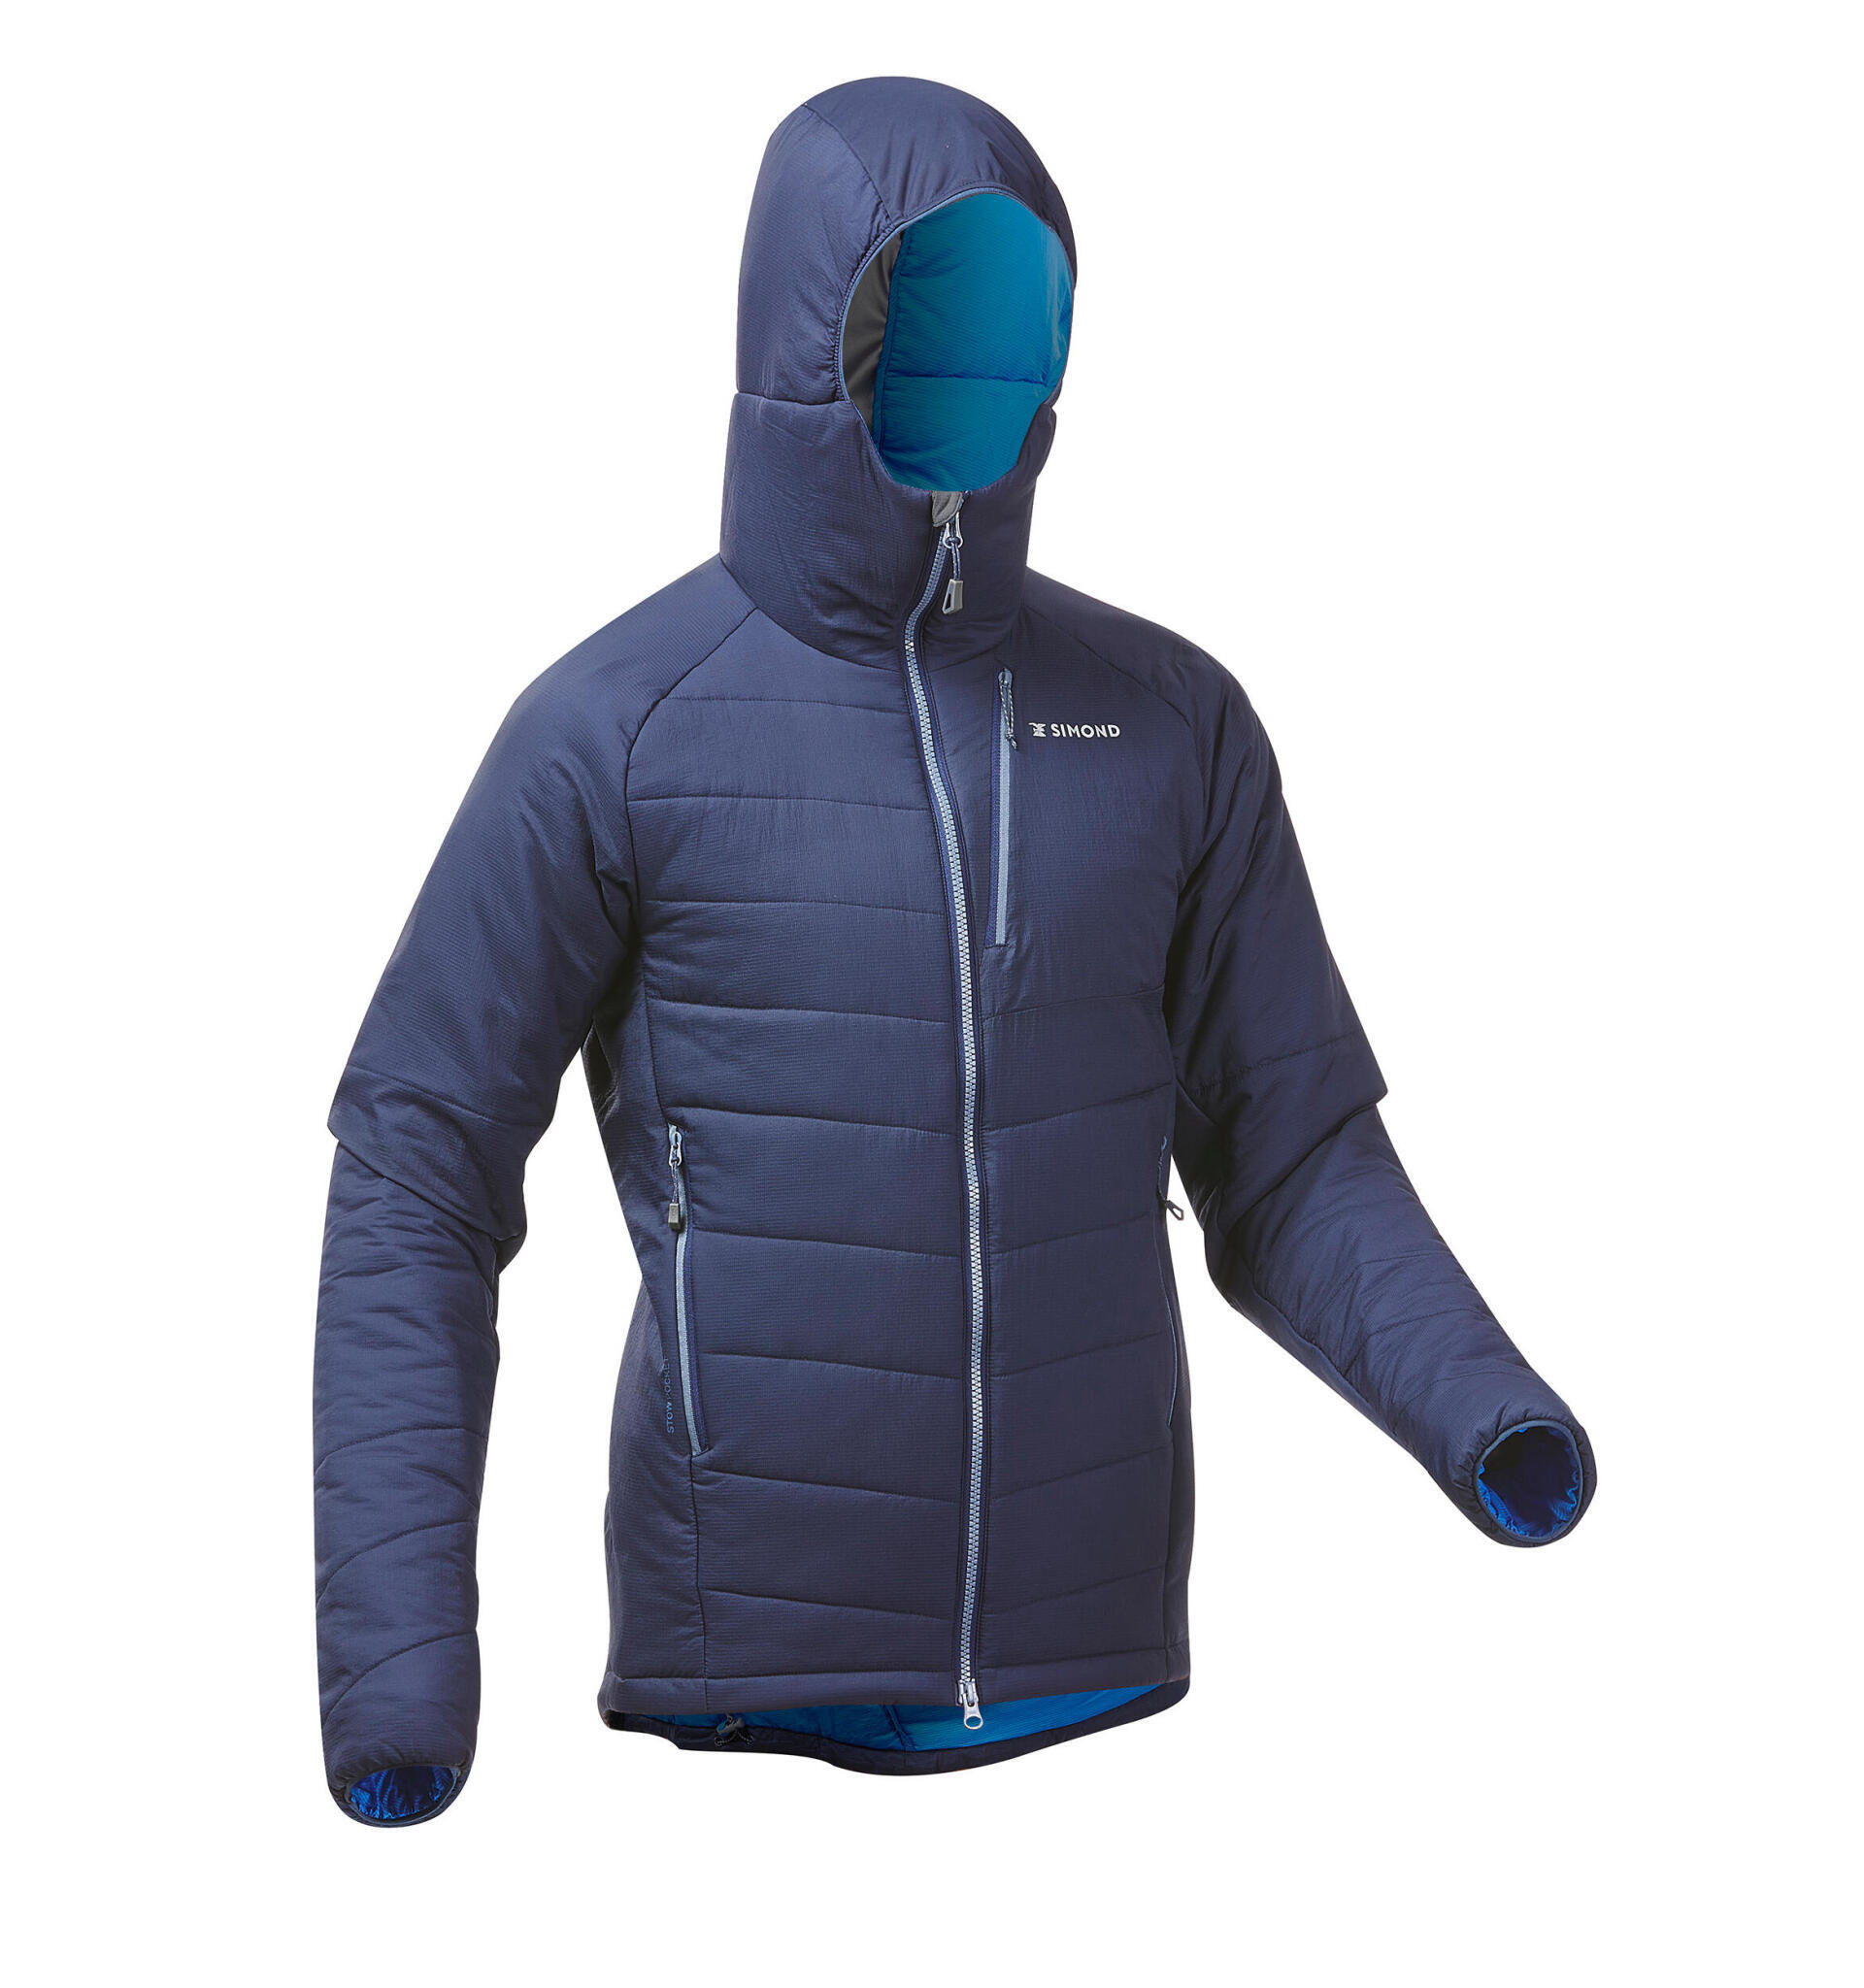 Performance pack - winter mountaineering, ice climbing and gullying